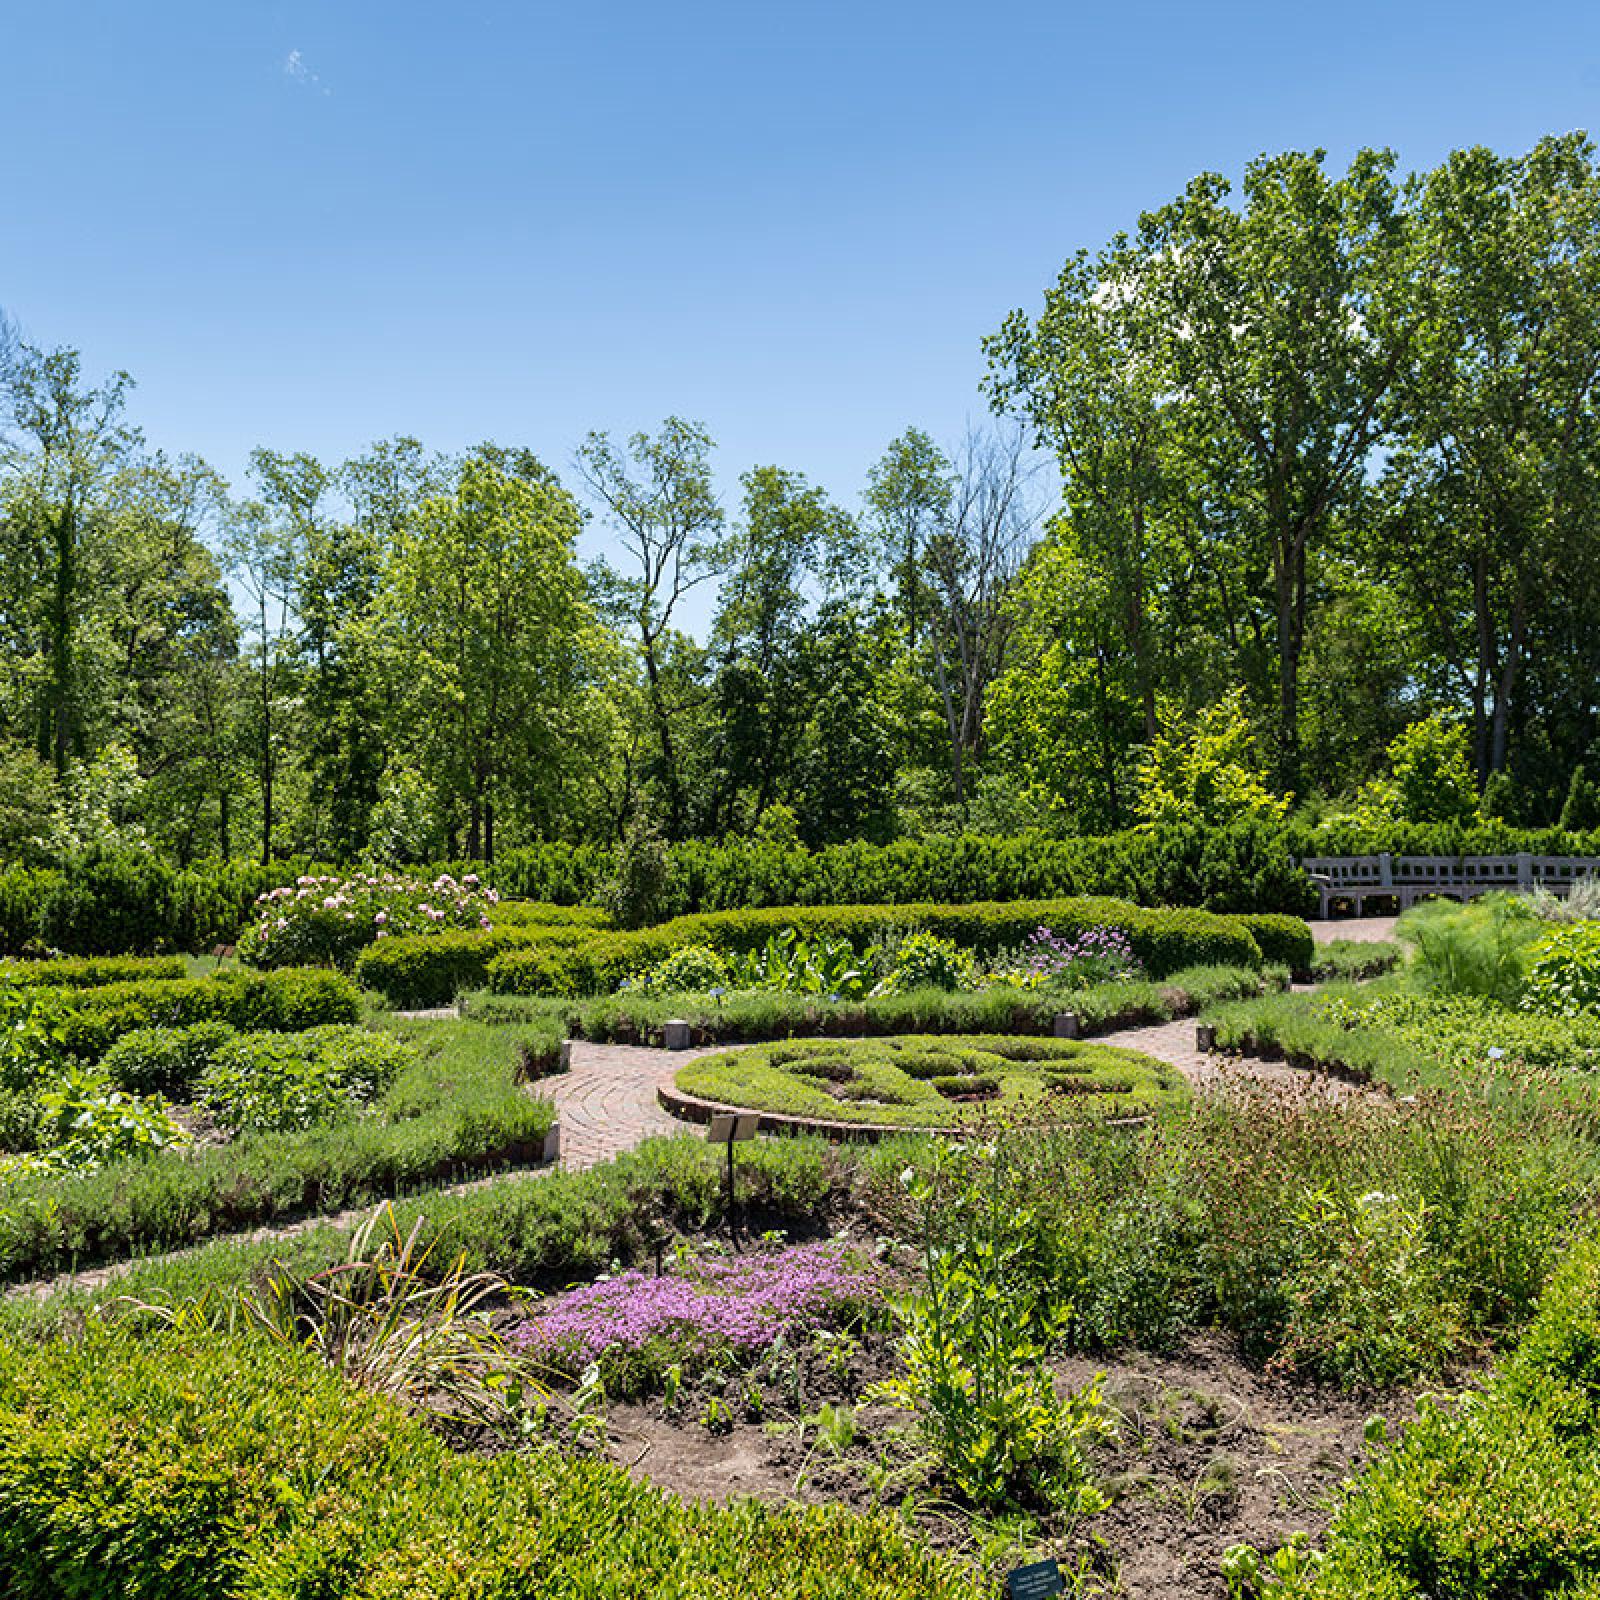 Southeastern view of the garden